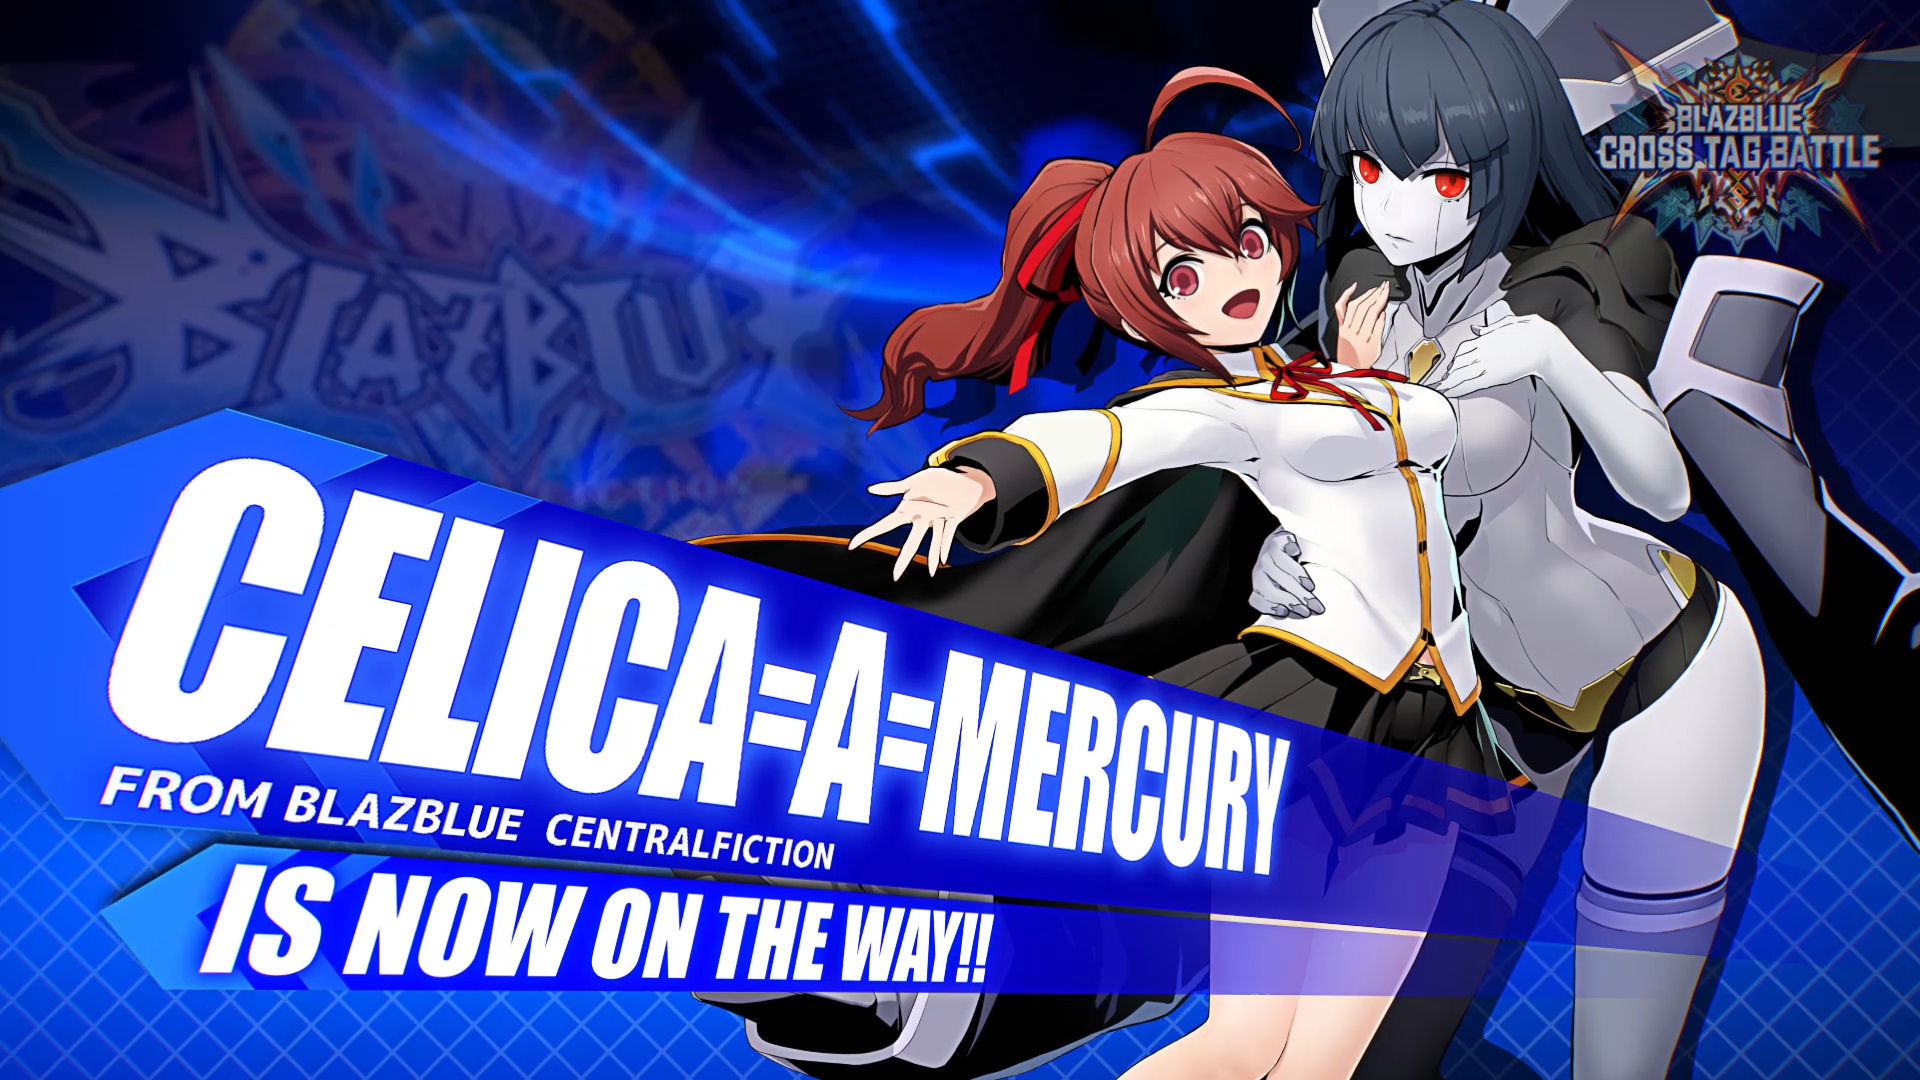 BlazBlue Cross Tag Battle Ver 2.0 New Characters 09/21/19